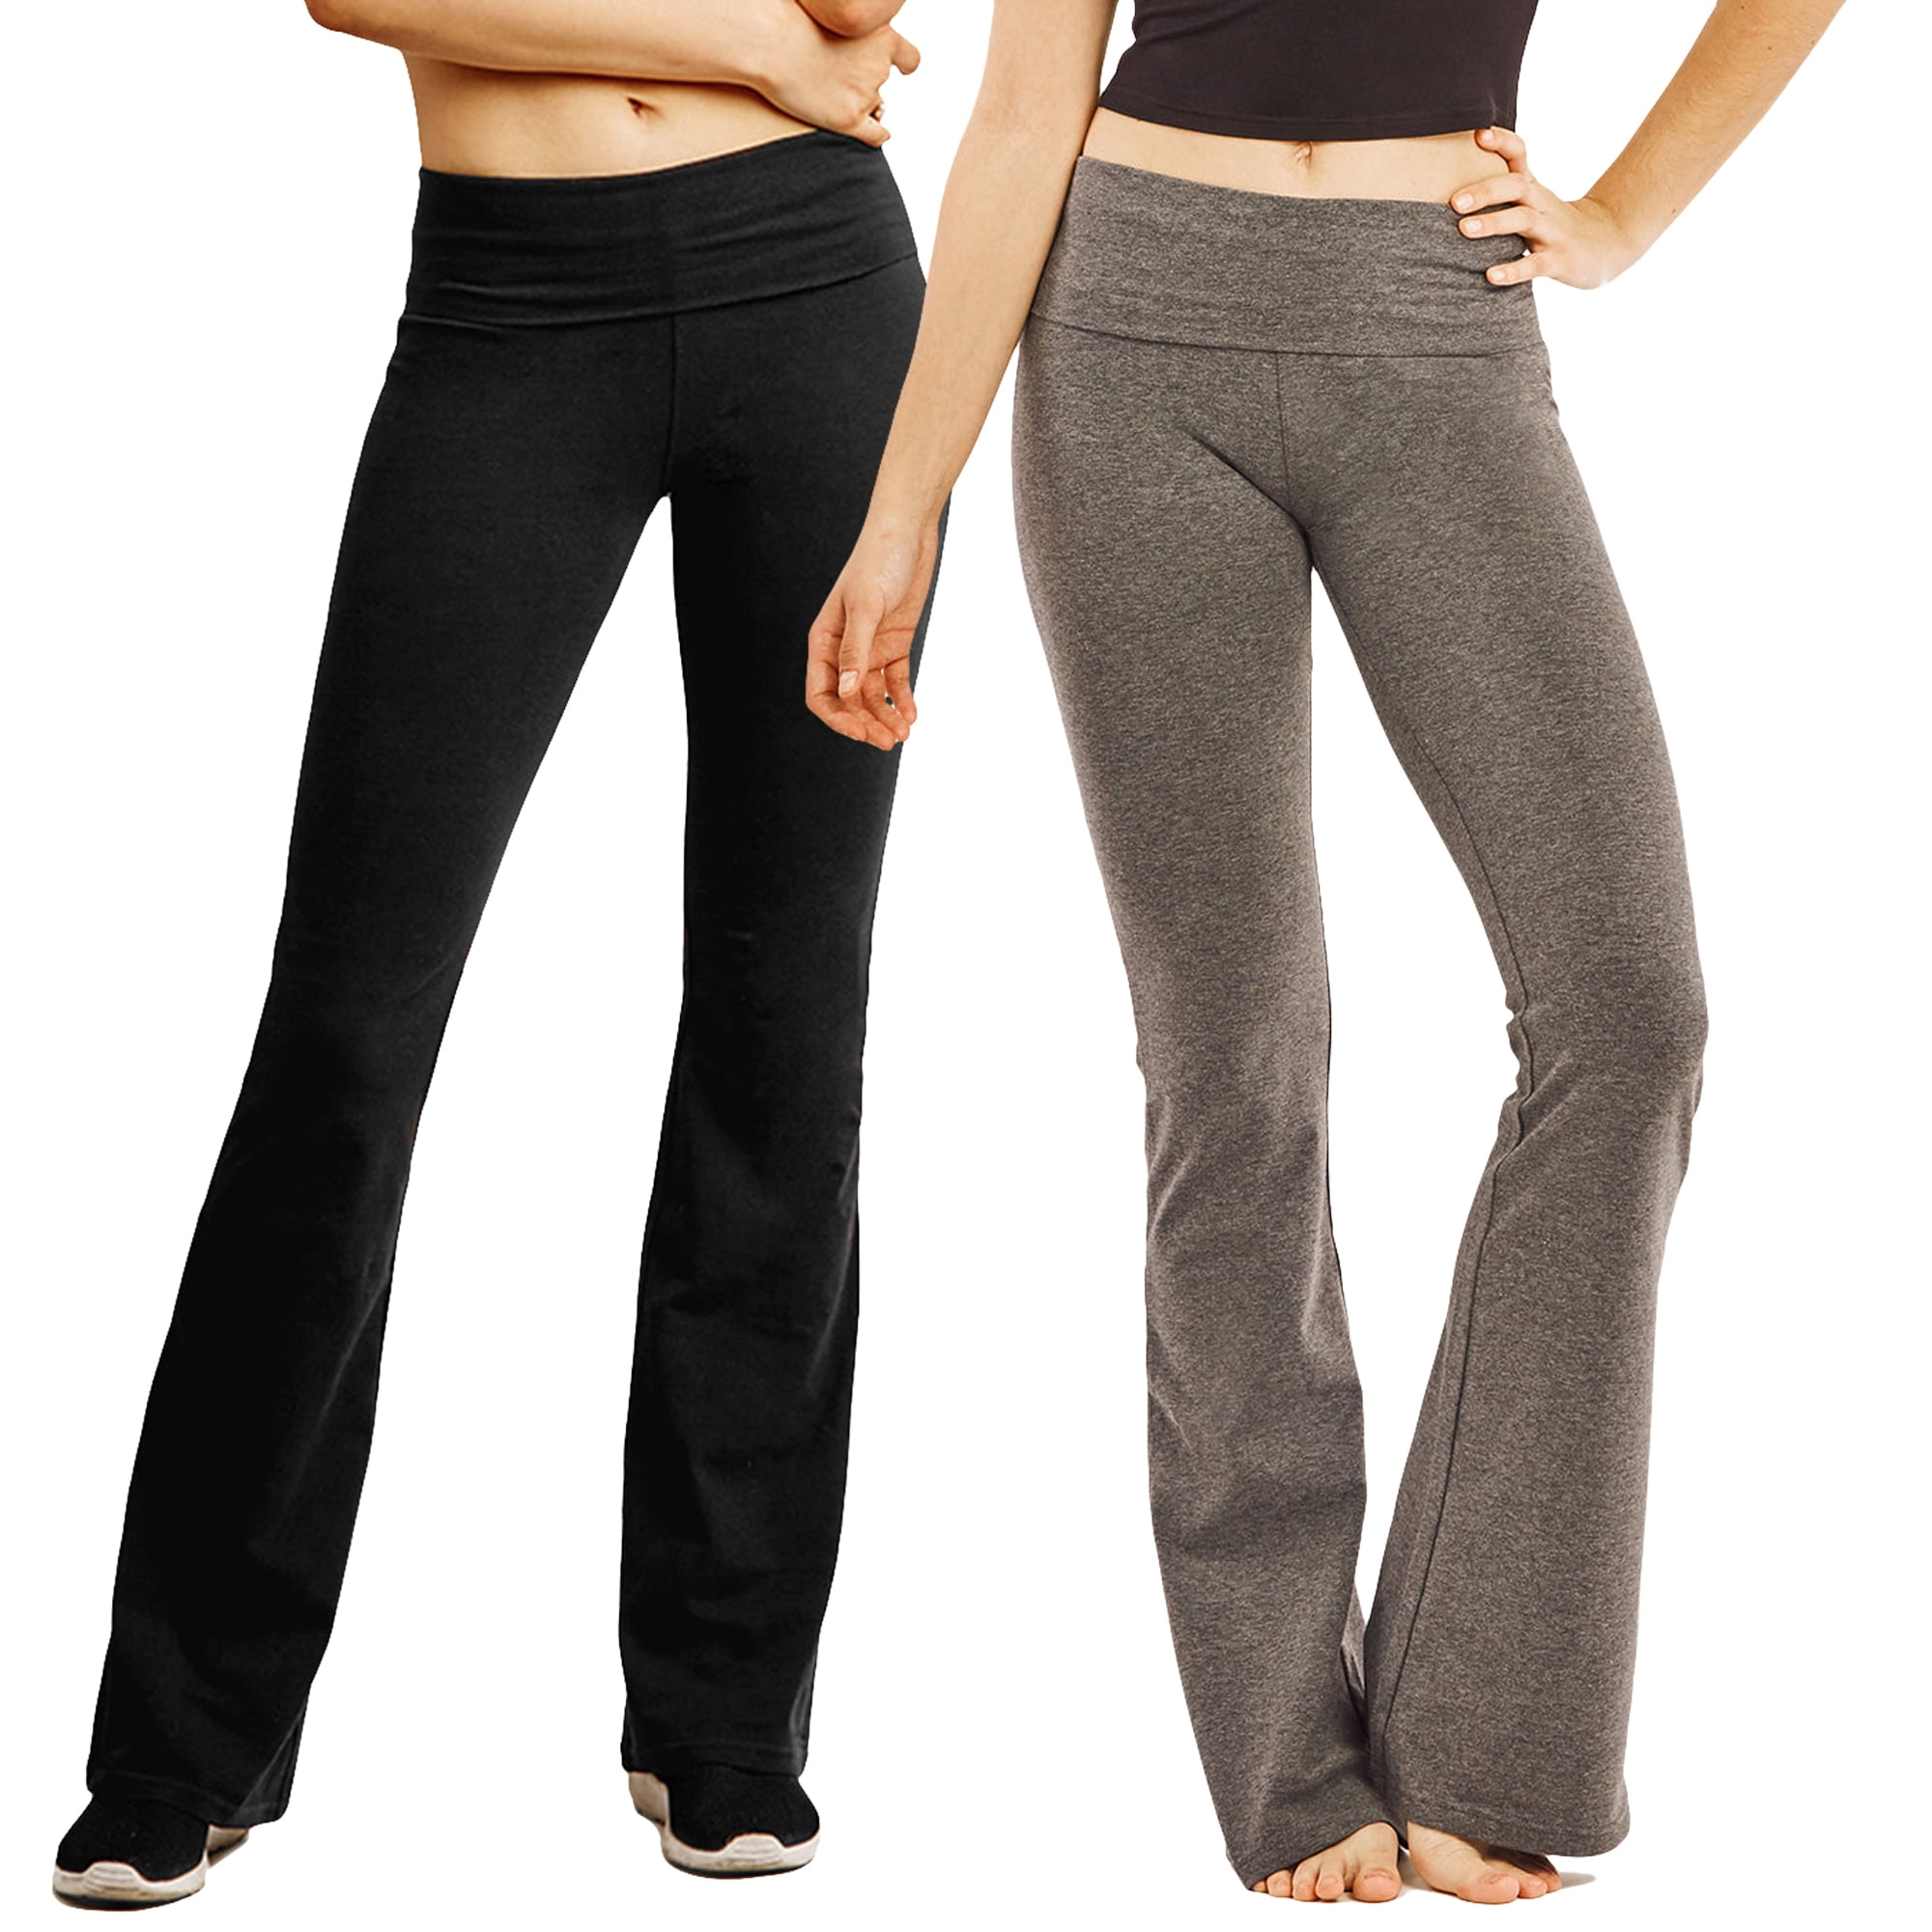 Mopas Yoga Leggings Cotton Pants With Fold Over Solid Waistband